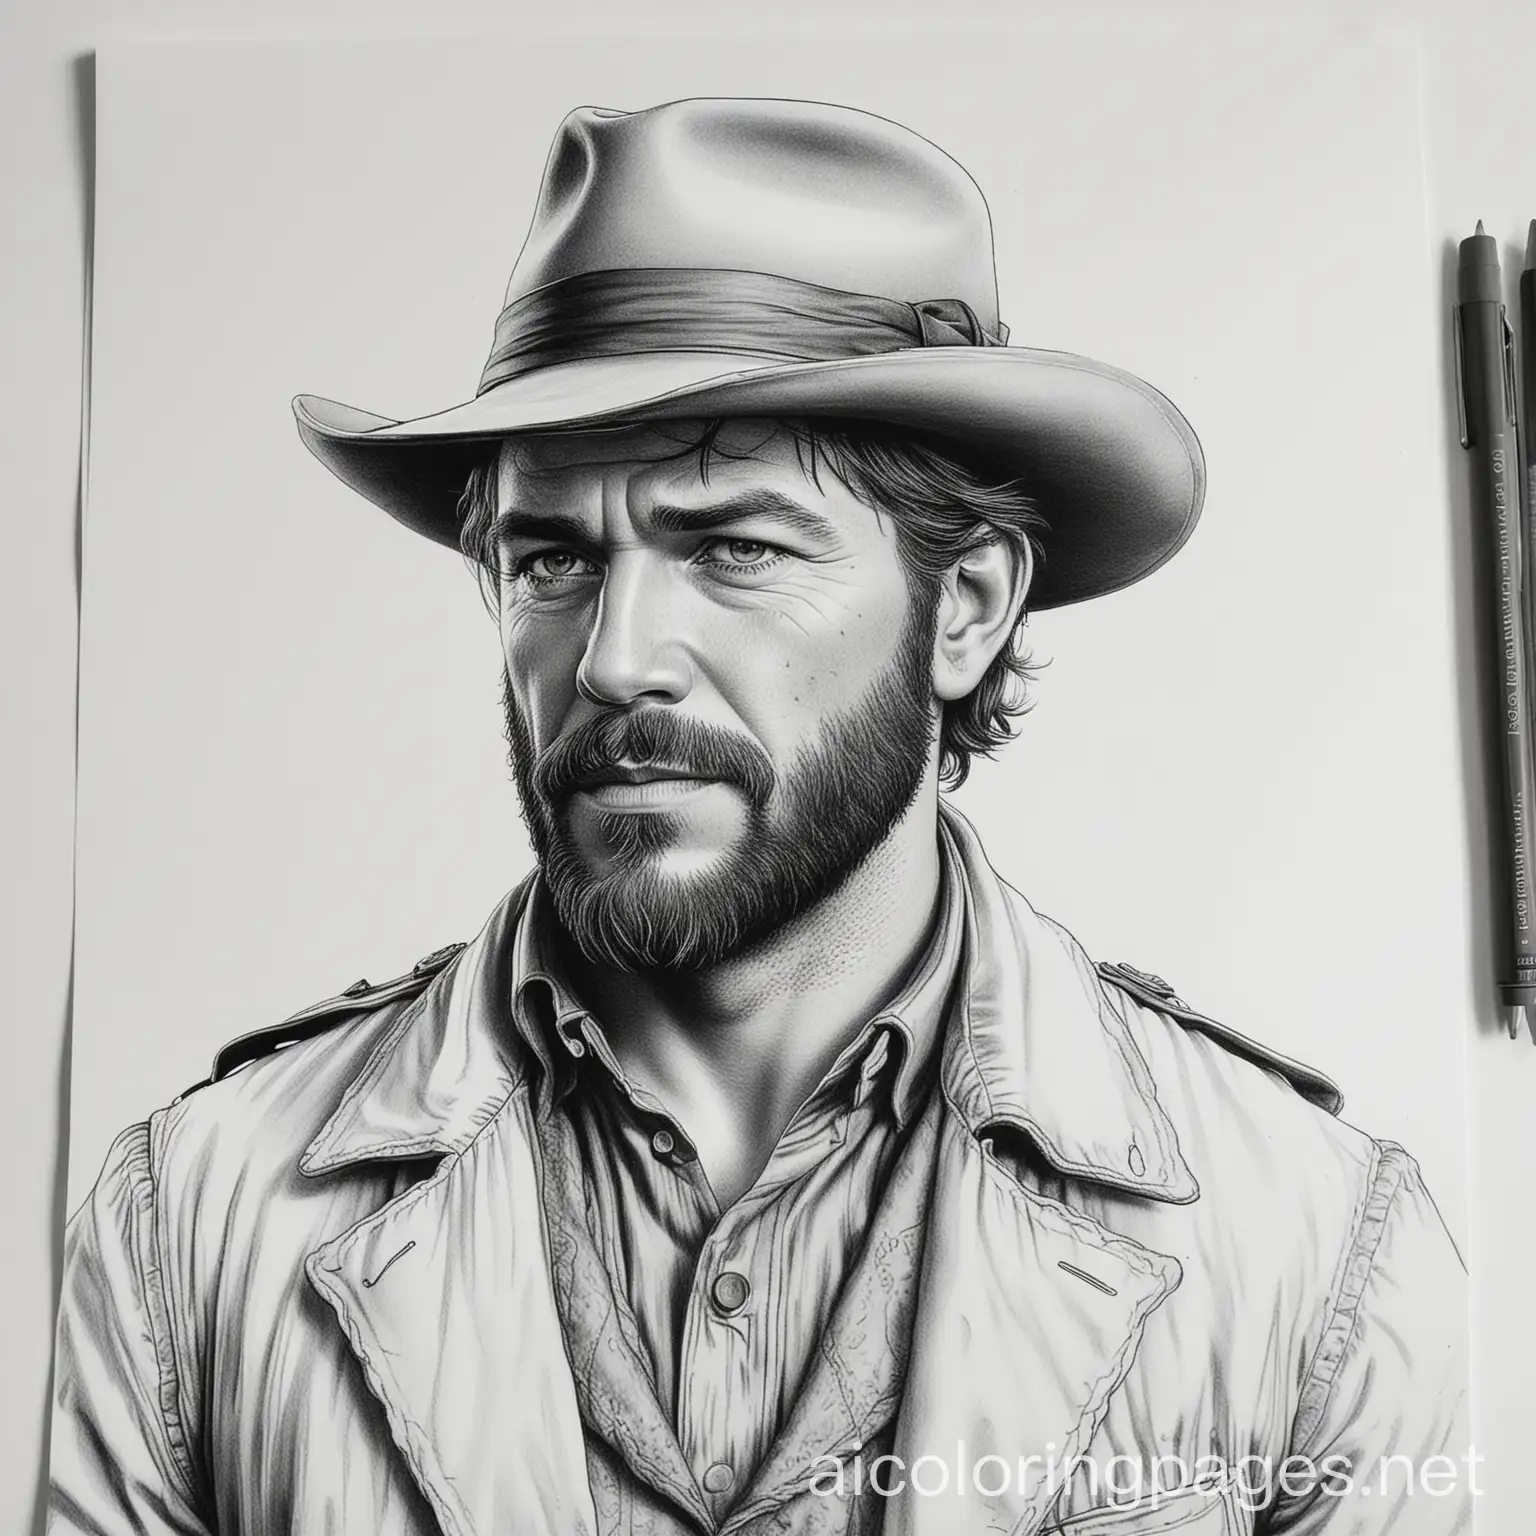 1899 Arthur Morgan in modern times, Coloring Page, black and white, line art, white background, Simplicity, Ample White Space